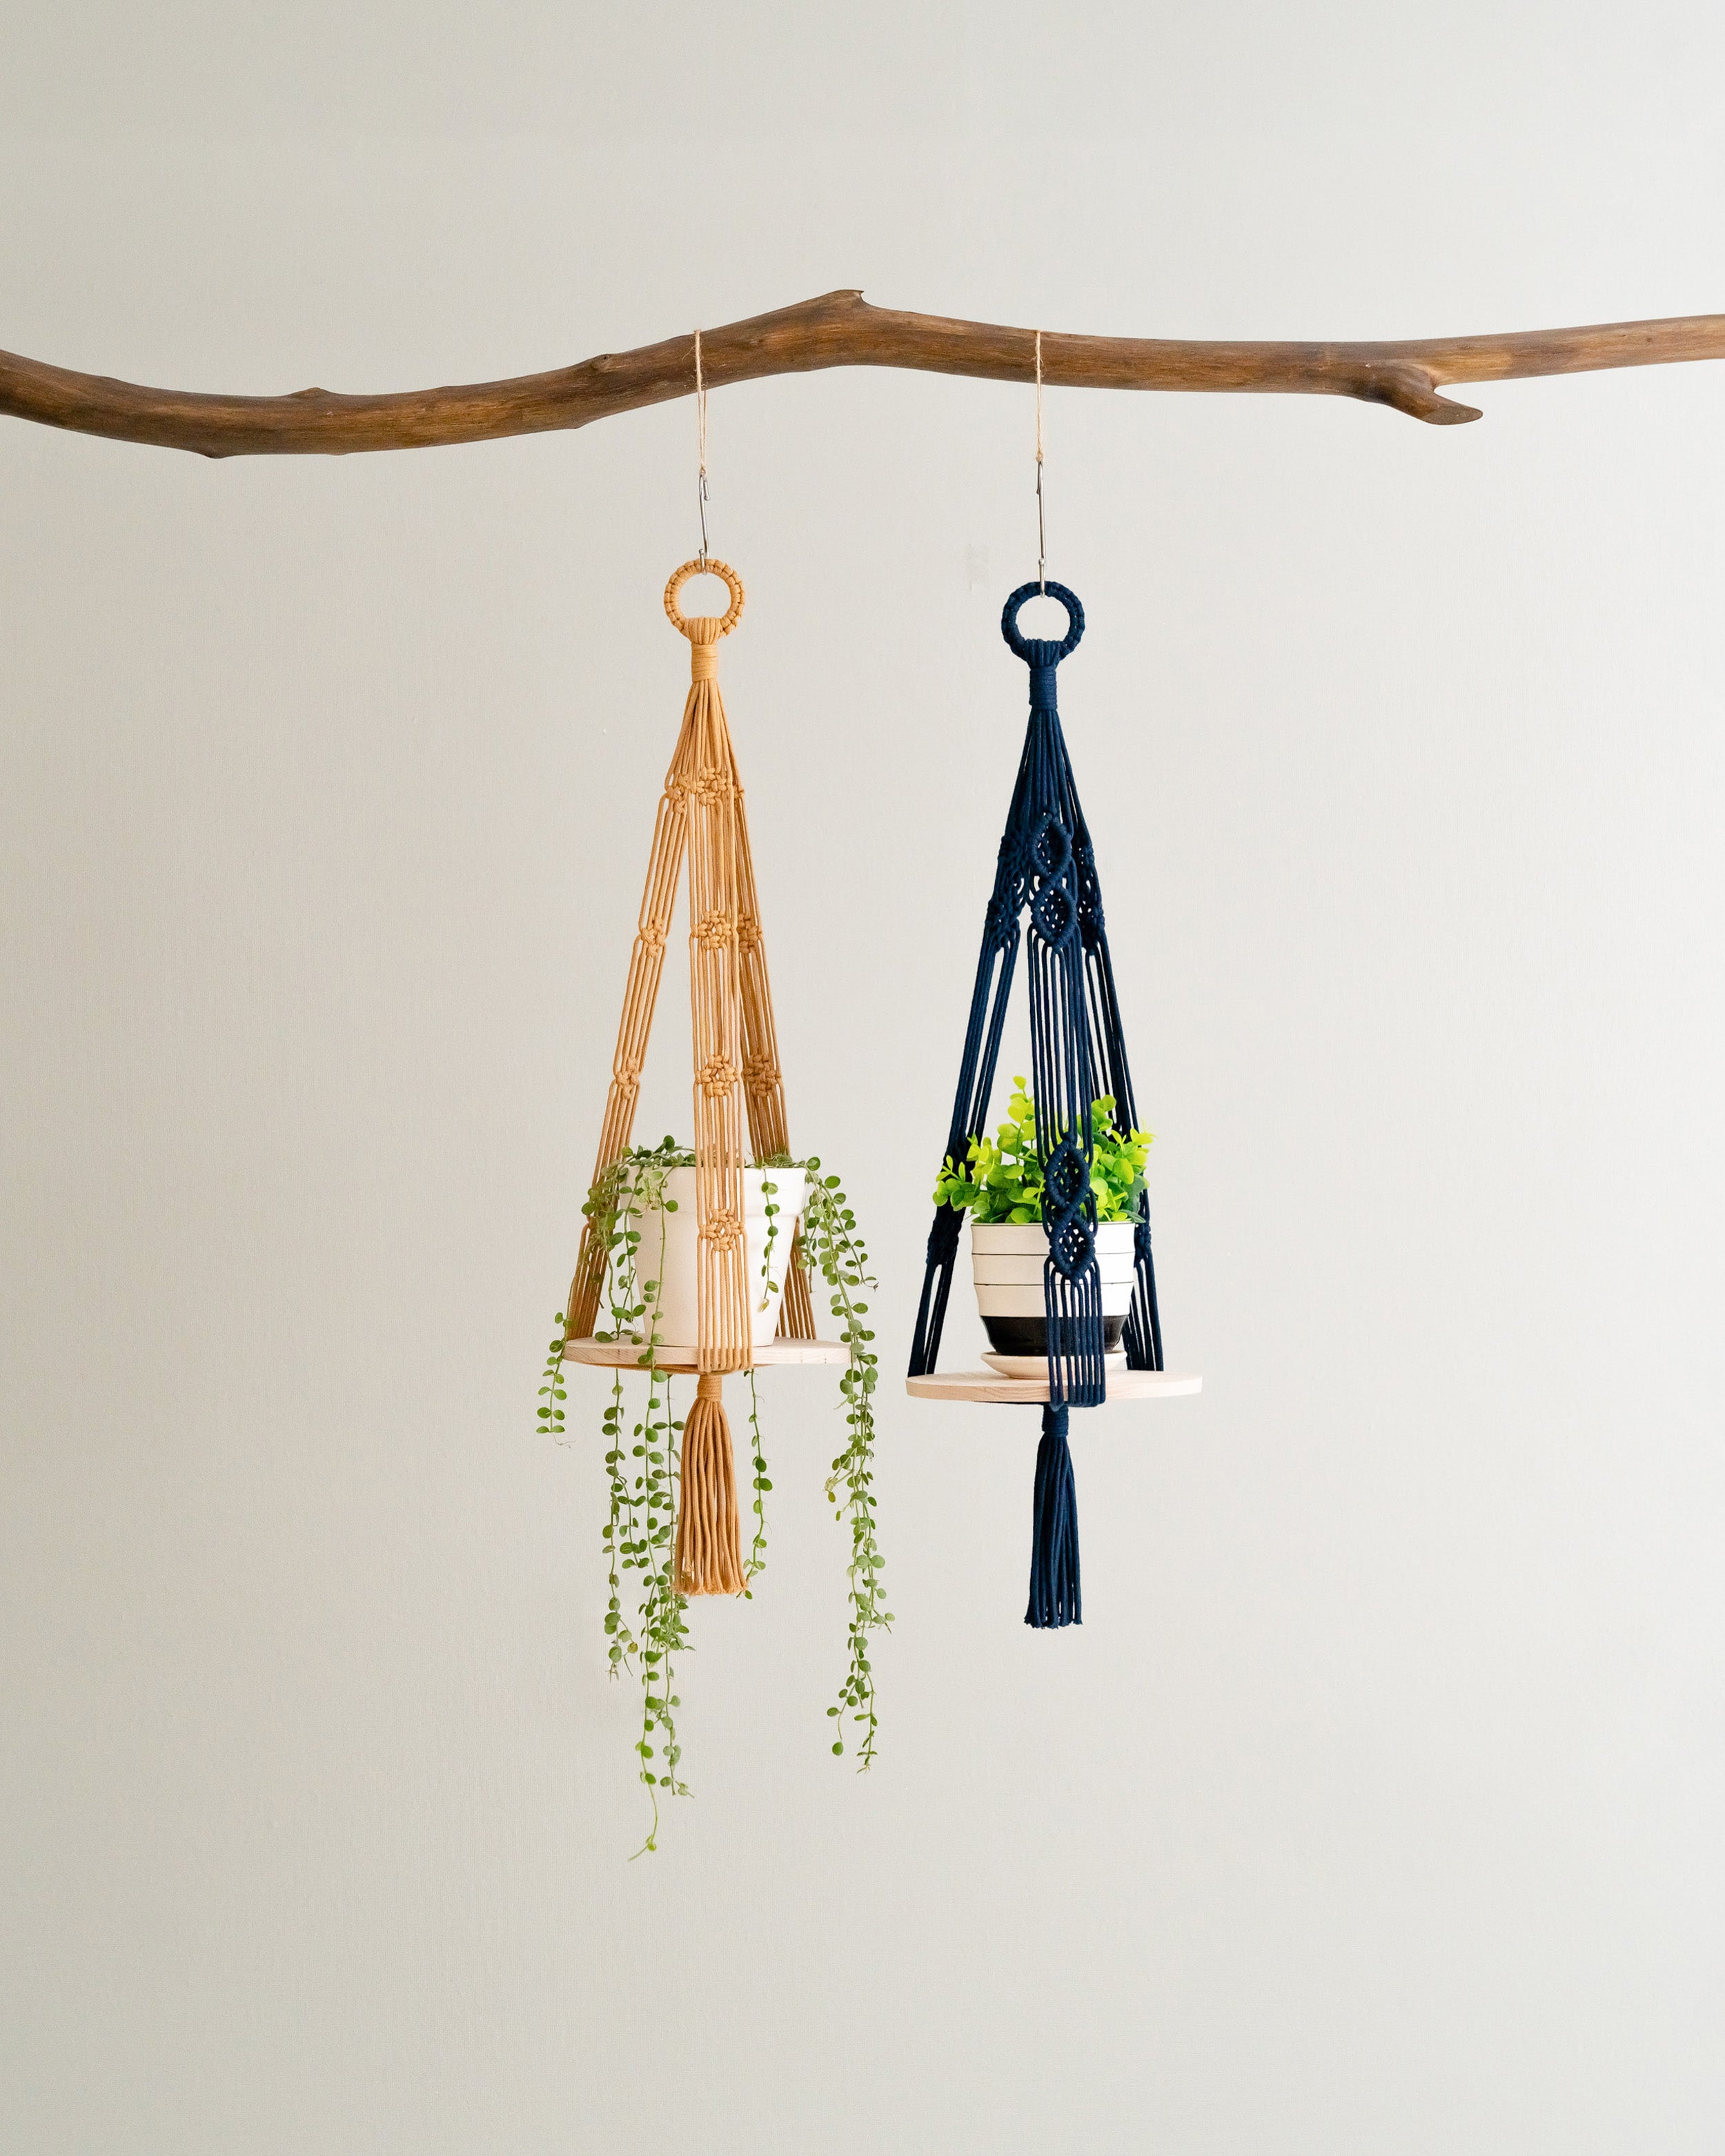 Wooden Plant Shelf for Boho Chic Hanging Plant Displays